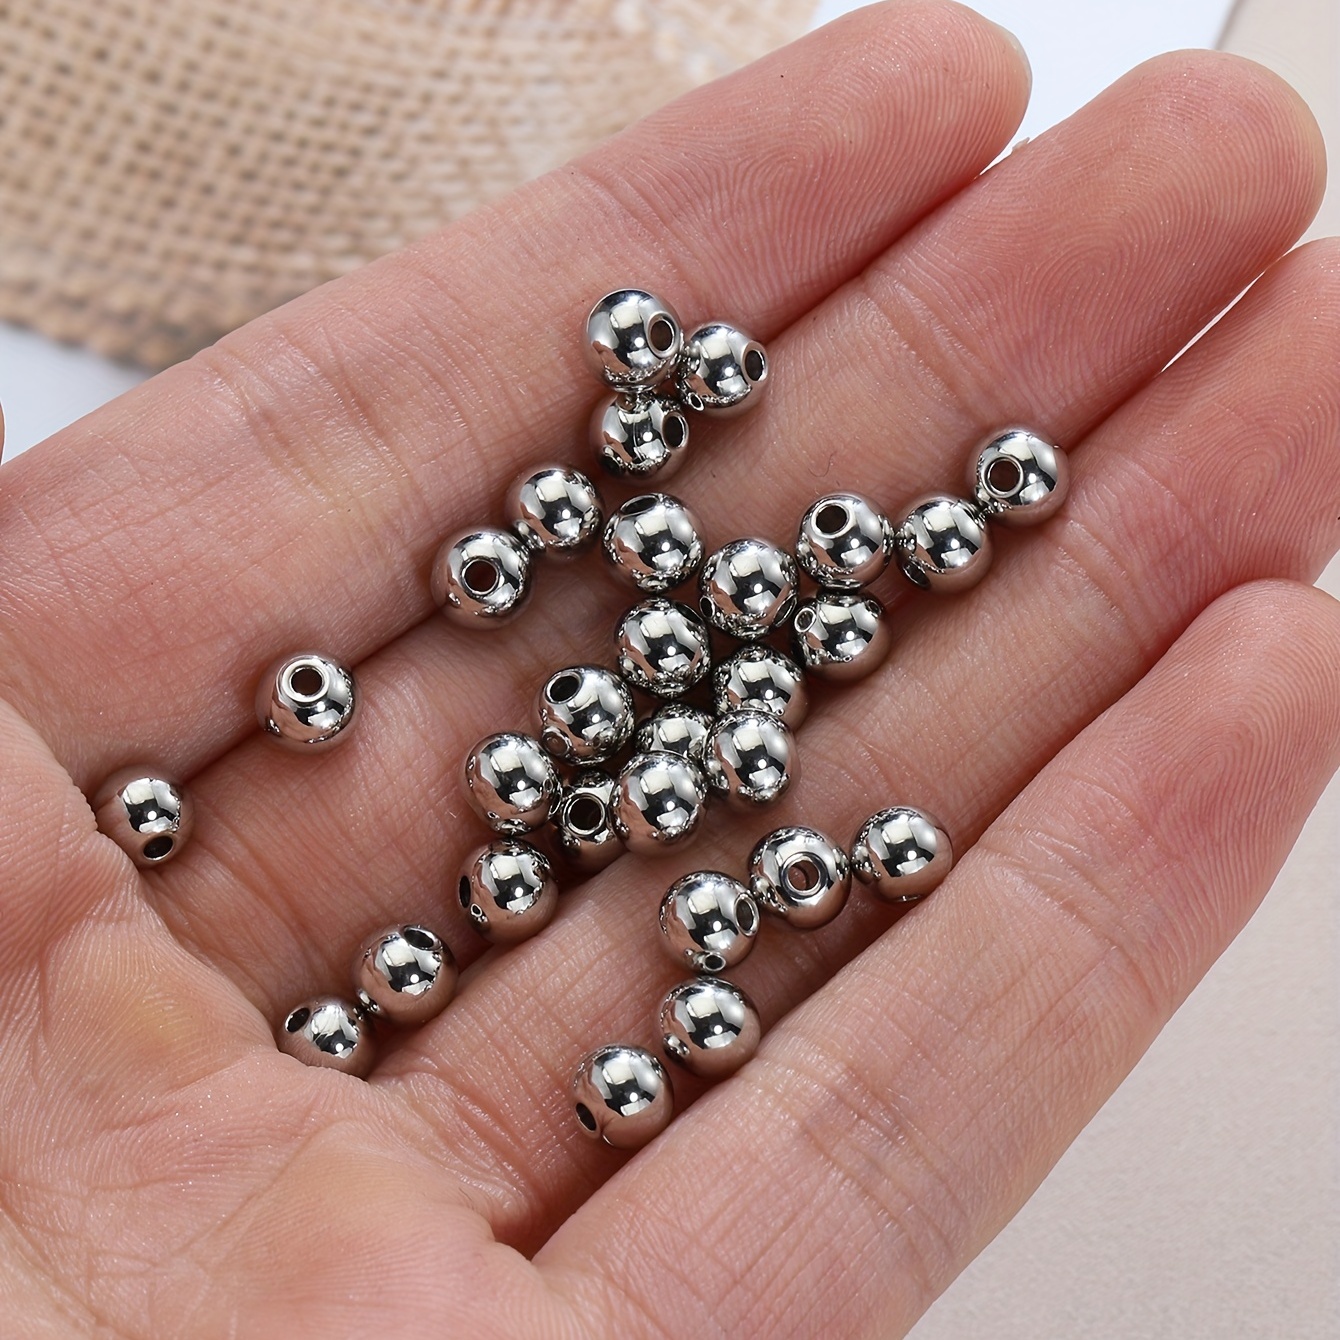 Sterling Silver BIG HOLE SPACER BEADS. 8mm. Packet of 12.